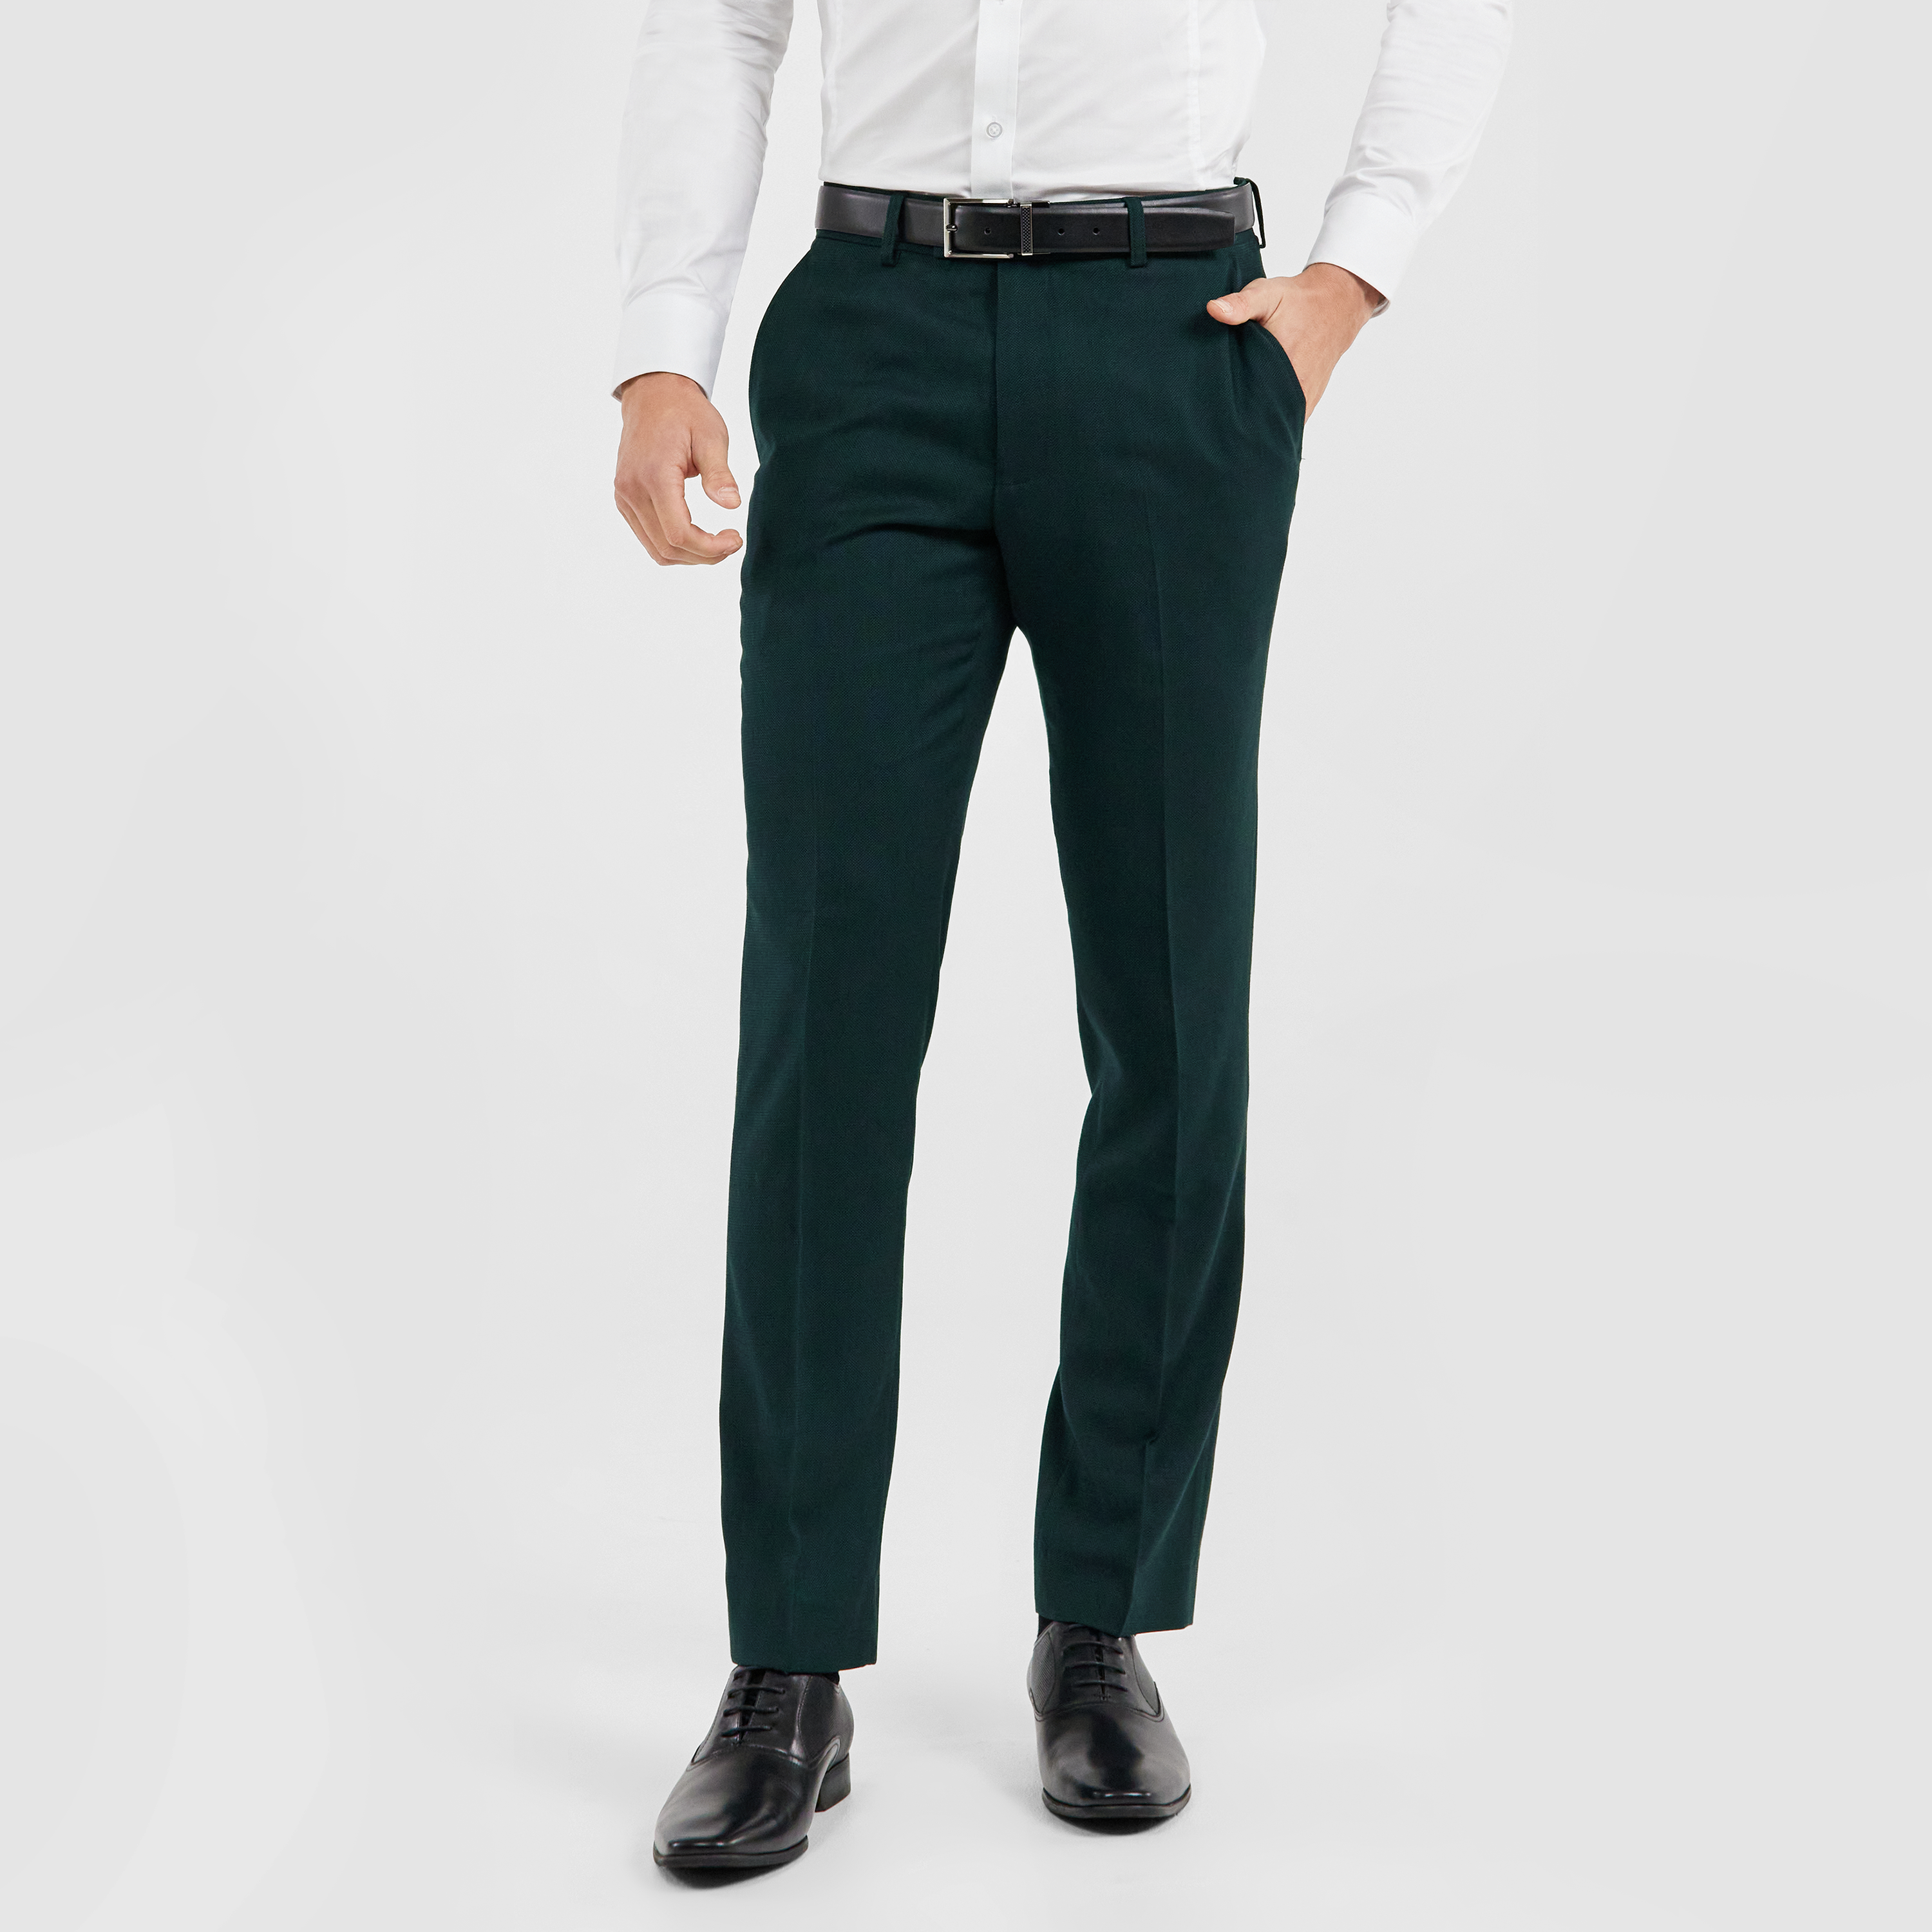 Jeans & Pants | Olive Green Formal Pants | Freeup